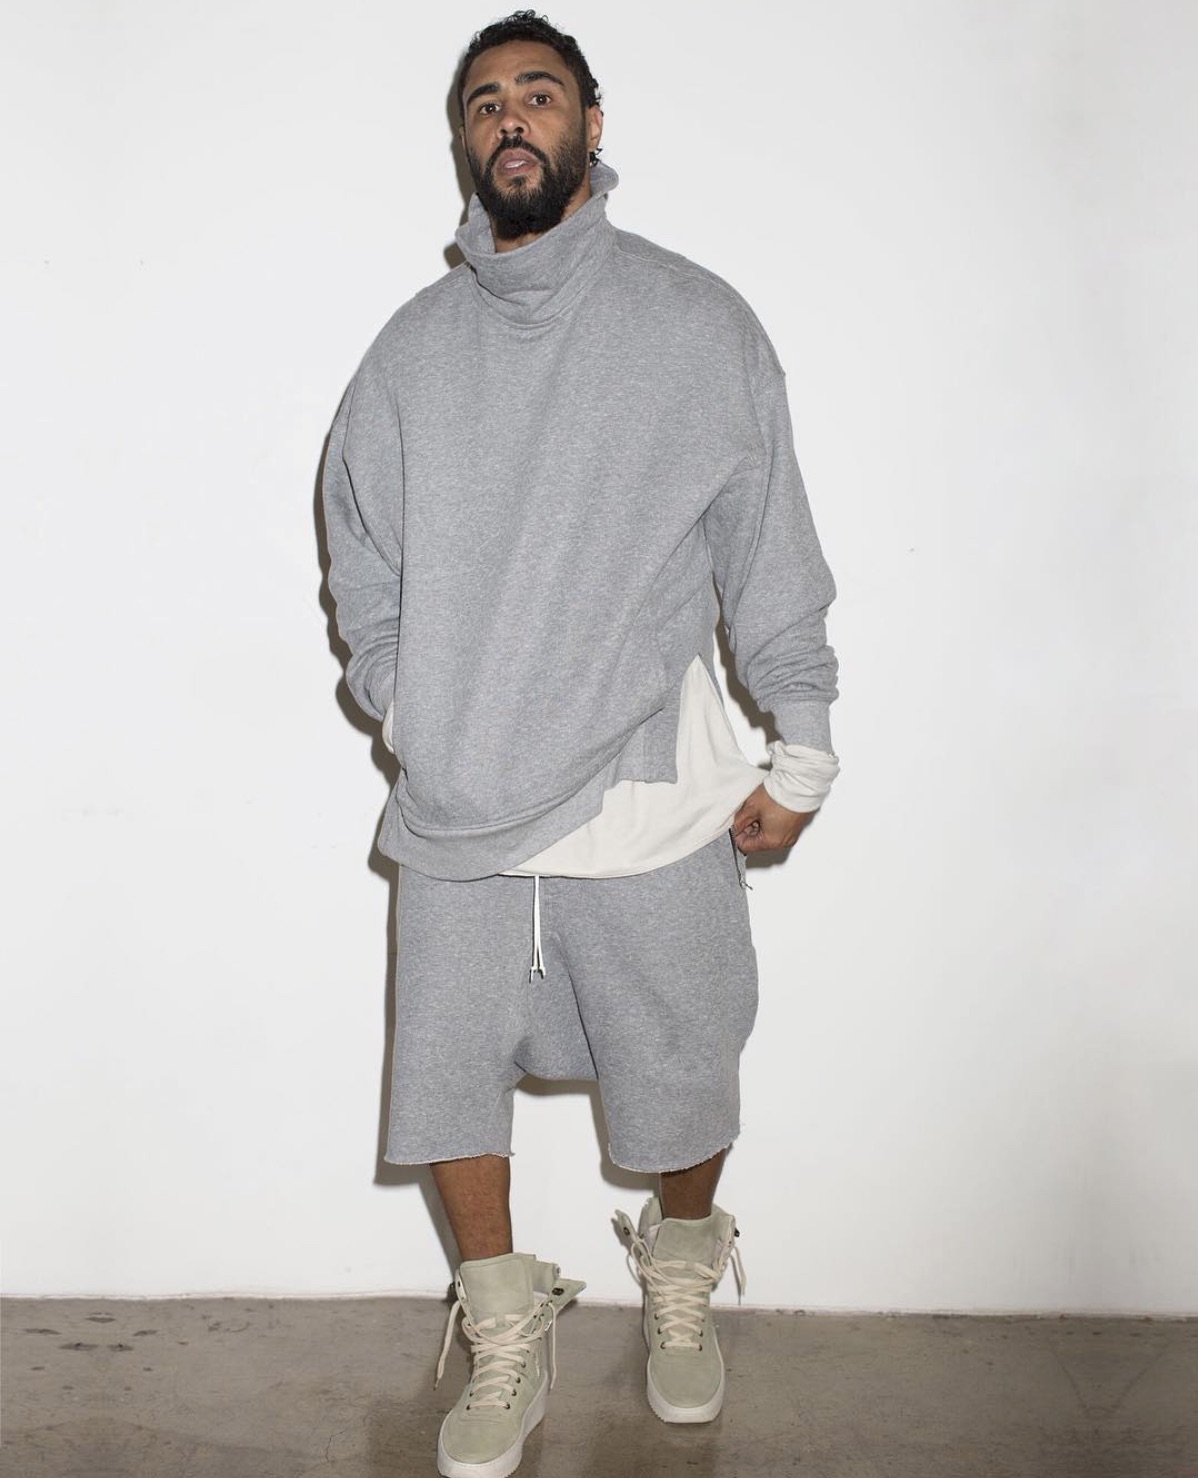 Jerry Lorenzo shows off new Fear of God colour on Instagram